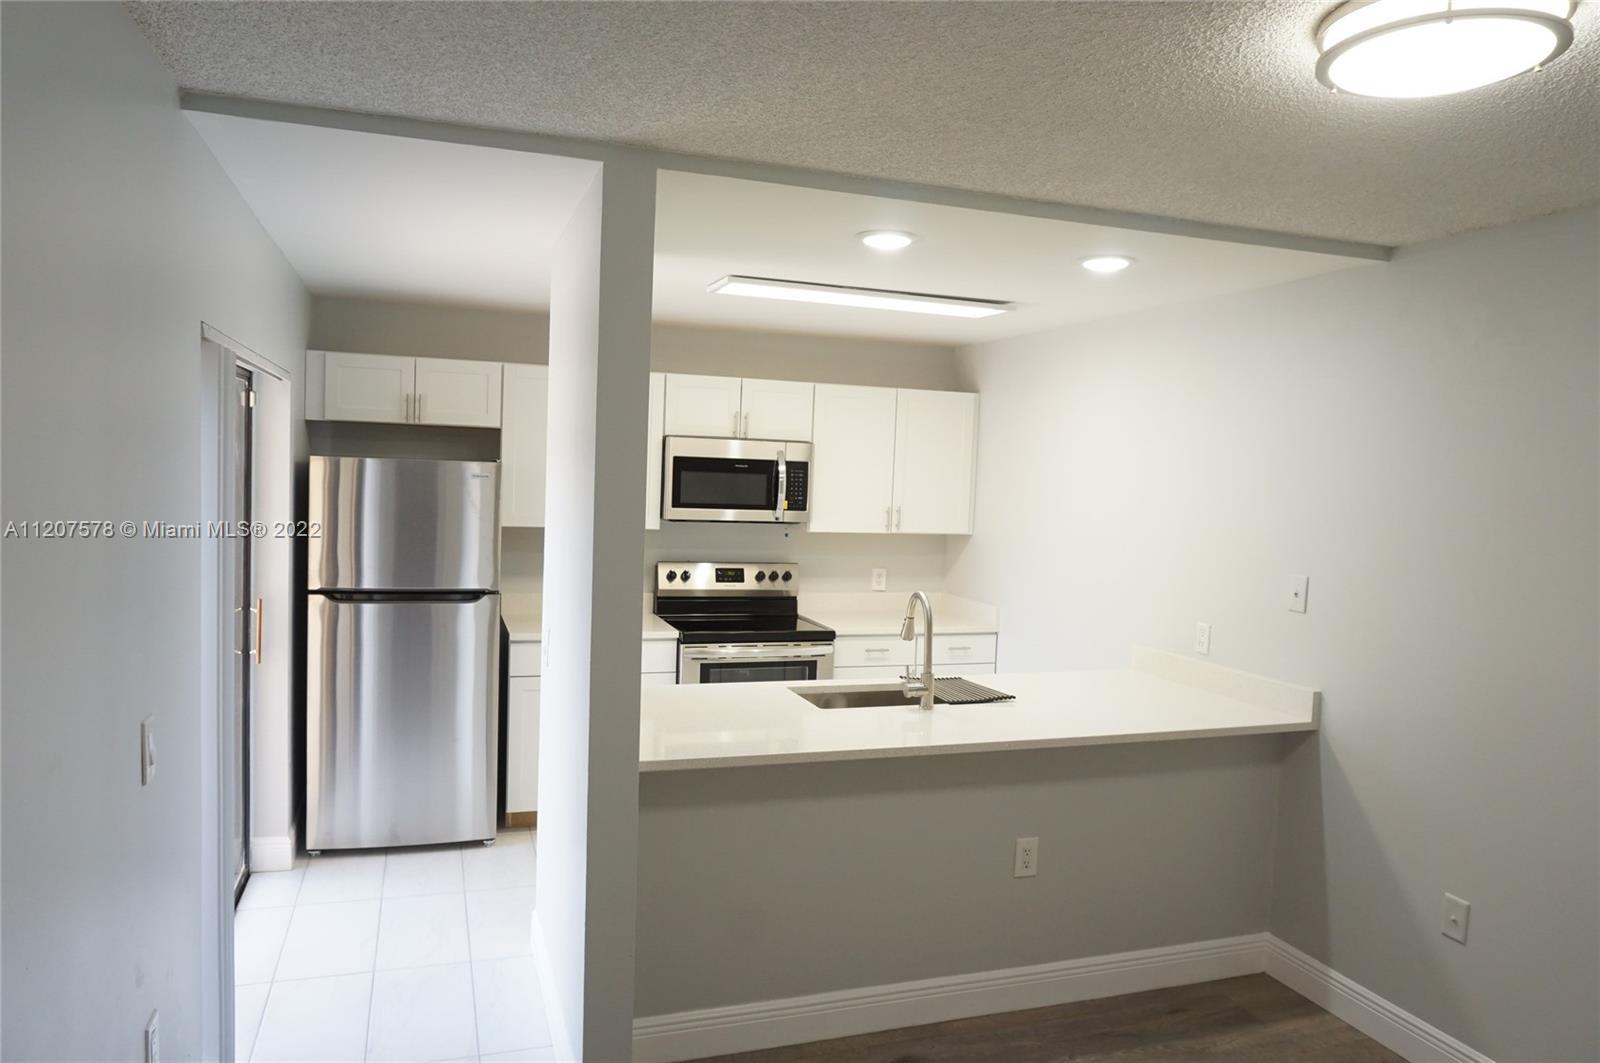 Wonderful townhouse  2 bedrooms and 2 bathrooms. Move in ready! Great upgrades, new appliances.